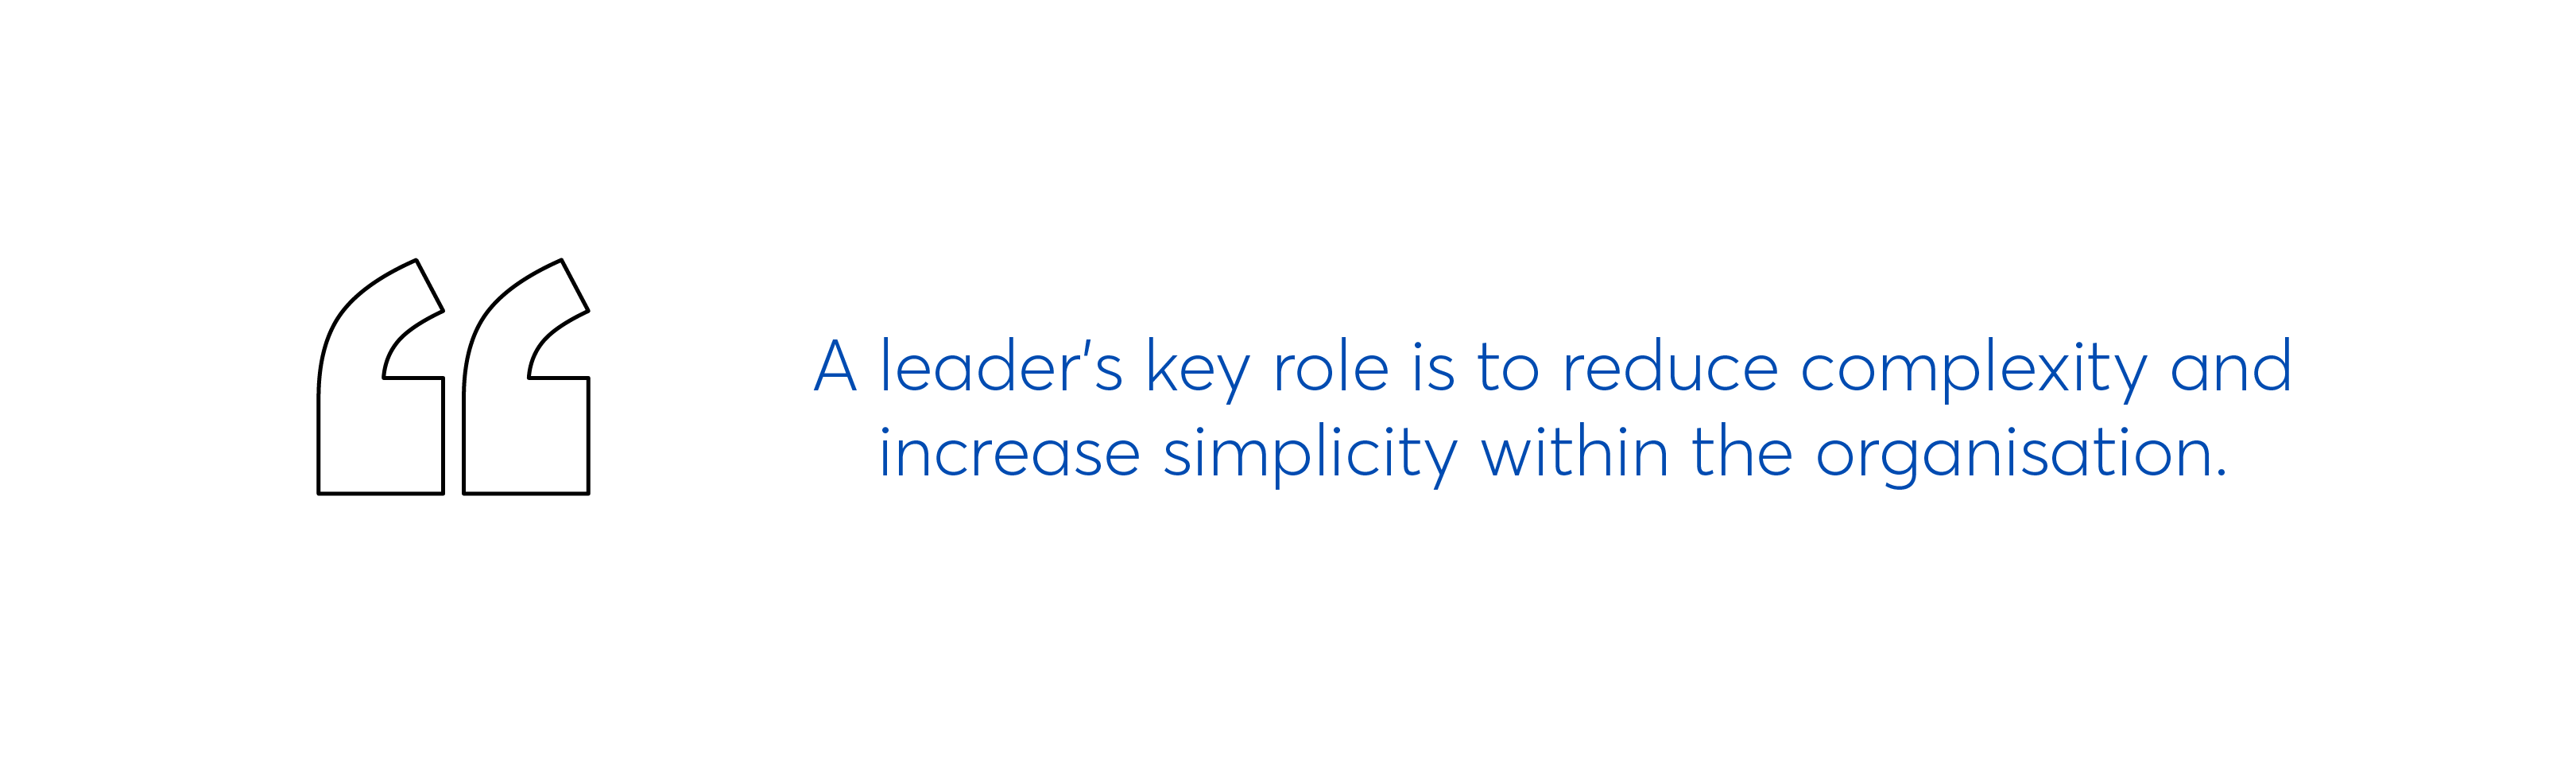 A leader's role is to reduce complexity